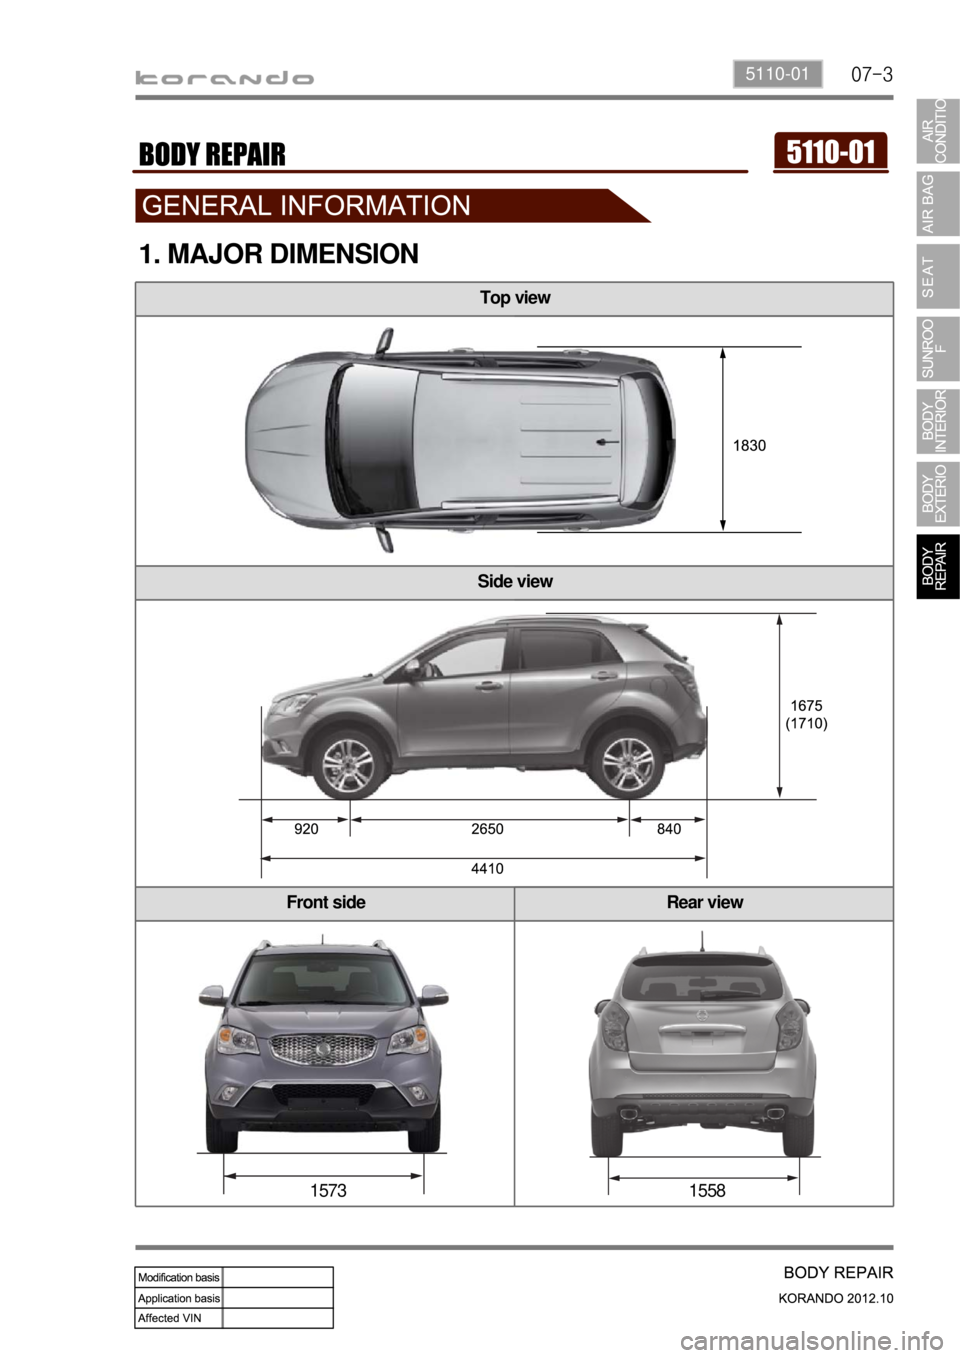 SSANGYONG KORANDO 2012  Service Manual 07-35110-01
1. MAJOR DIMENSION
15581573
Top view
Side view
Front side Rear view 